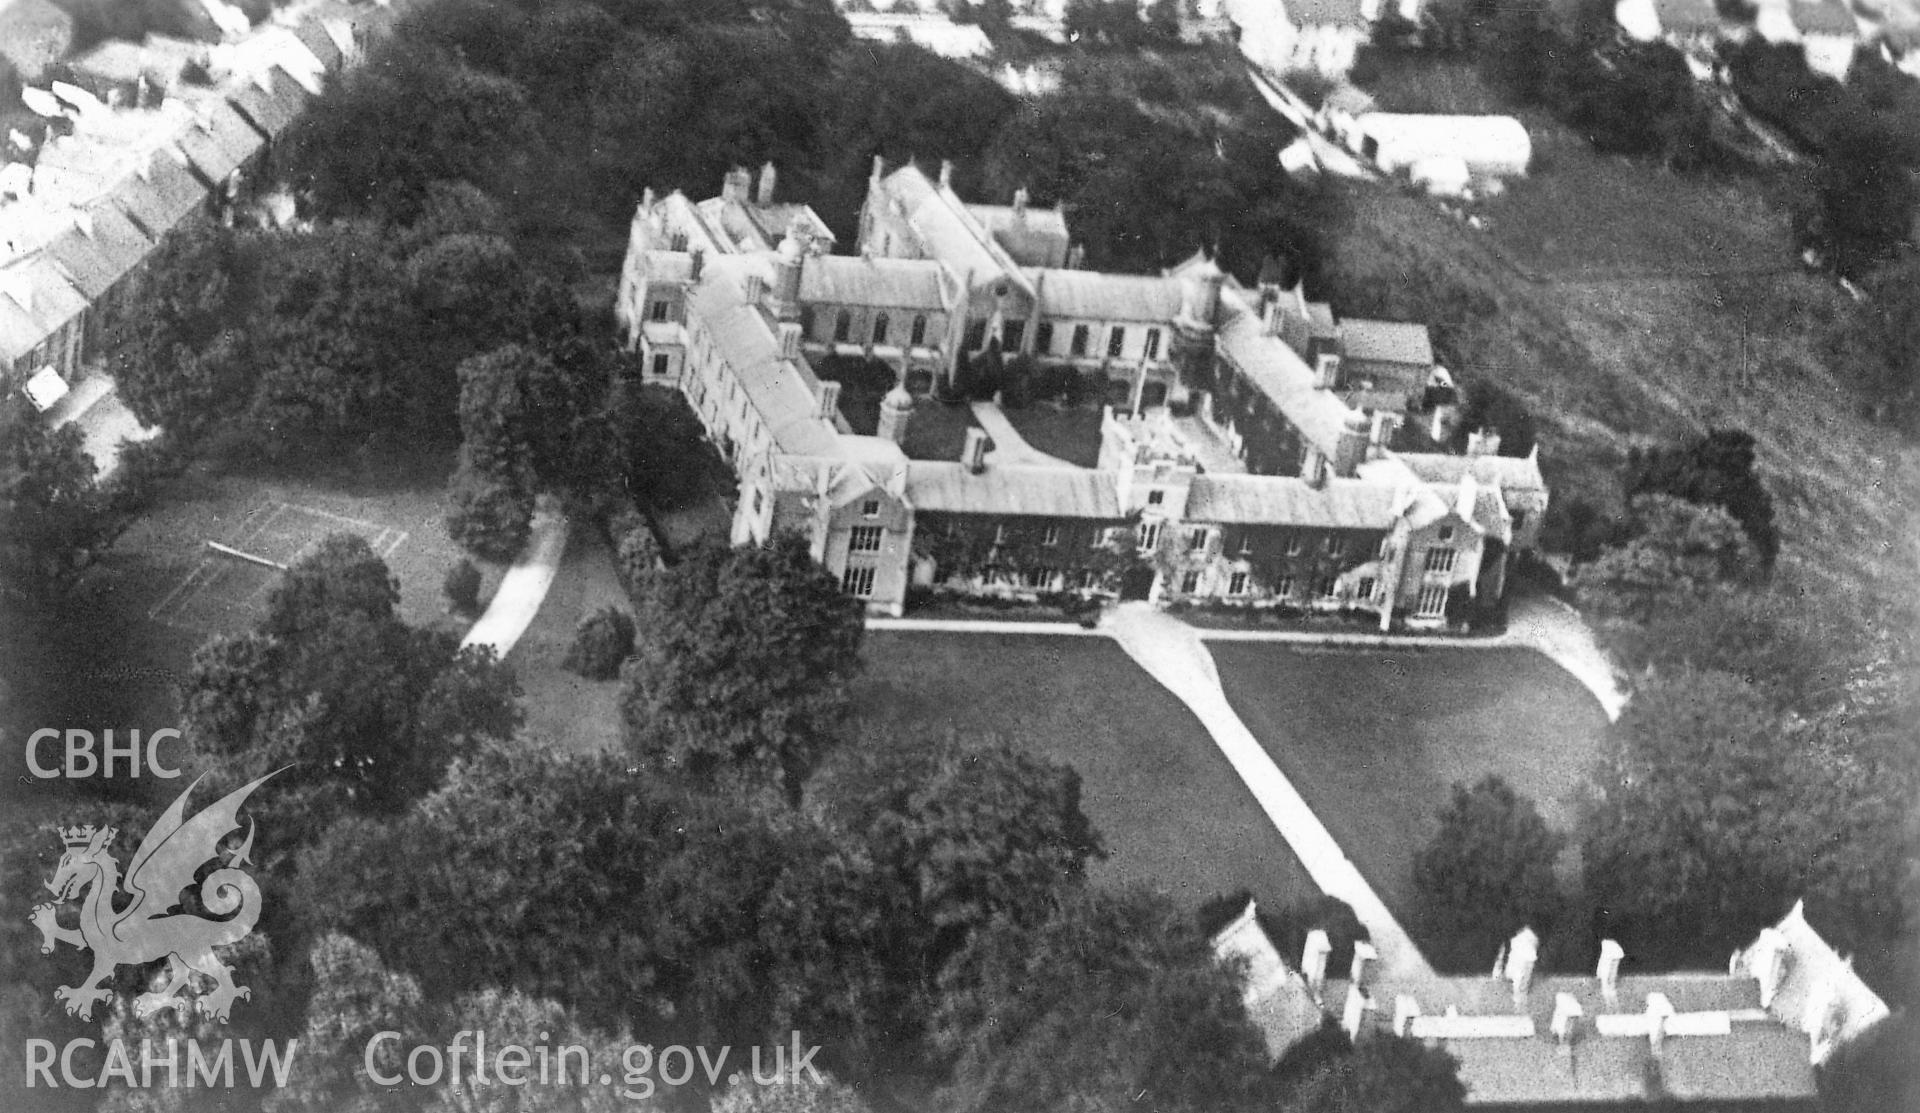 Digitised copy  of a postcard showing a black and white aerial photograph of St David's College, Lampeter, copied from a postcard from the personal postcard collection of C.S. Briggs.